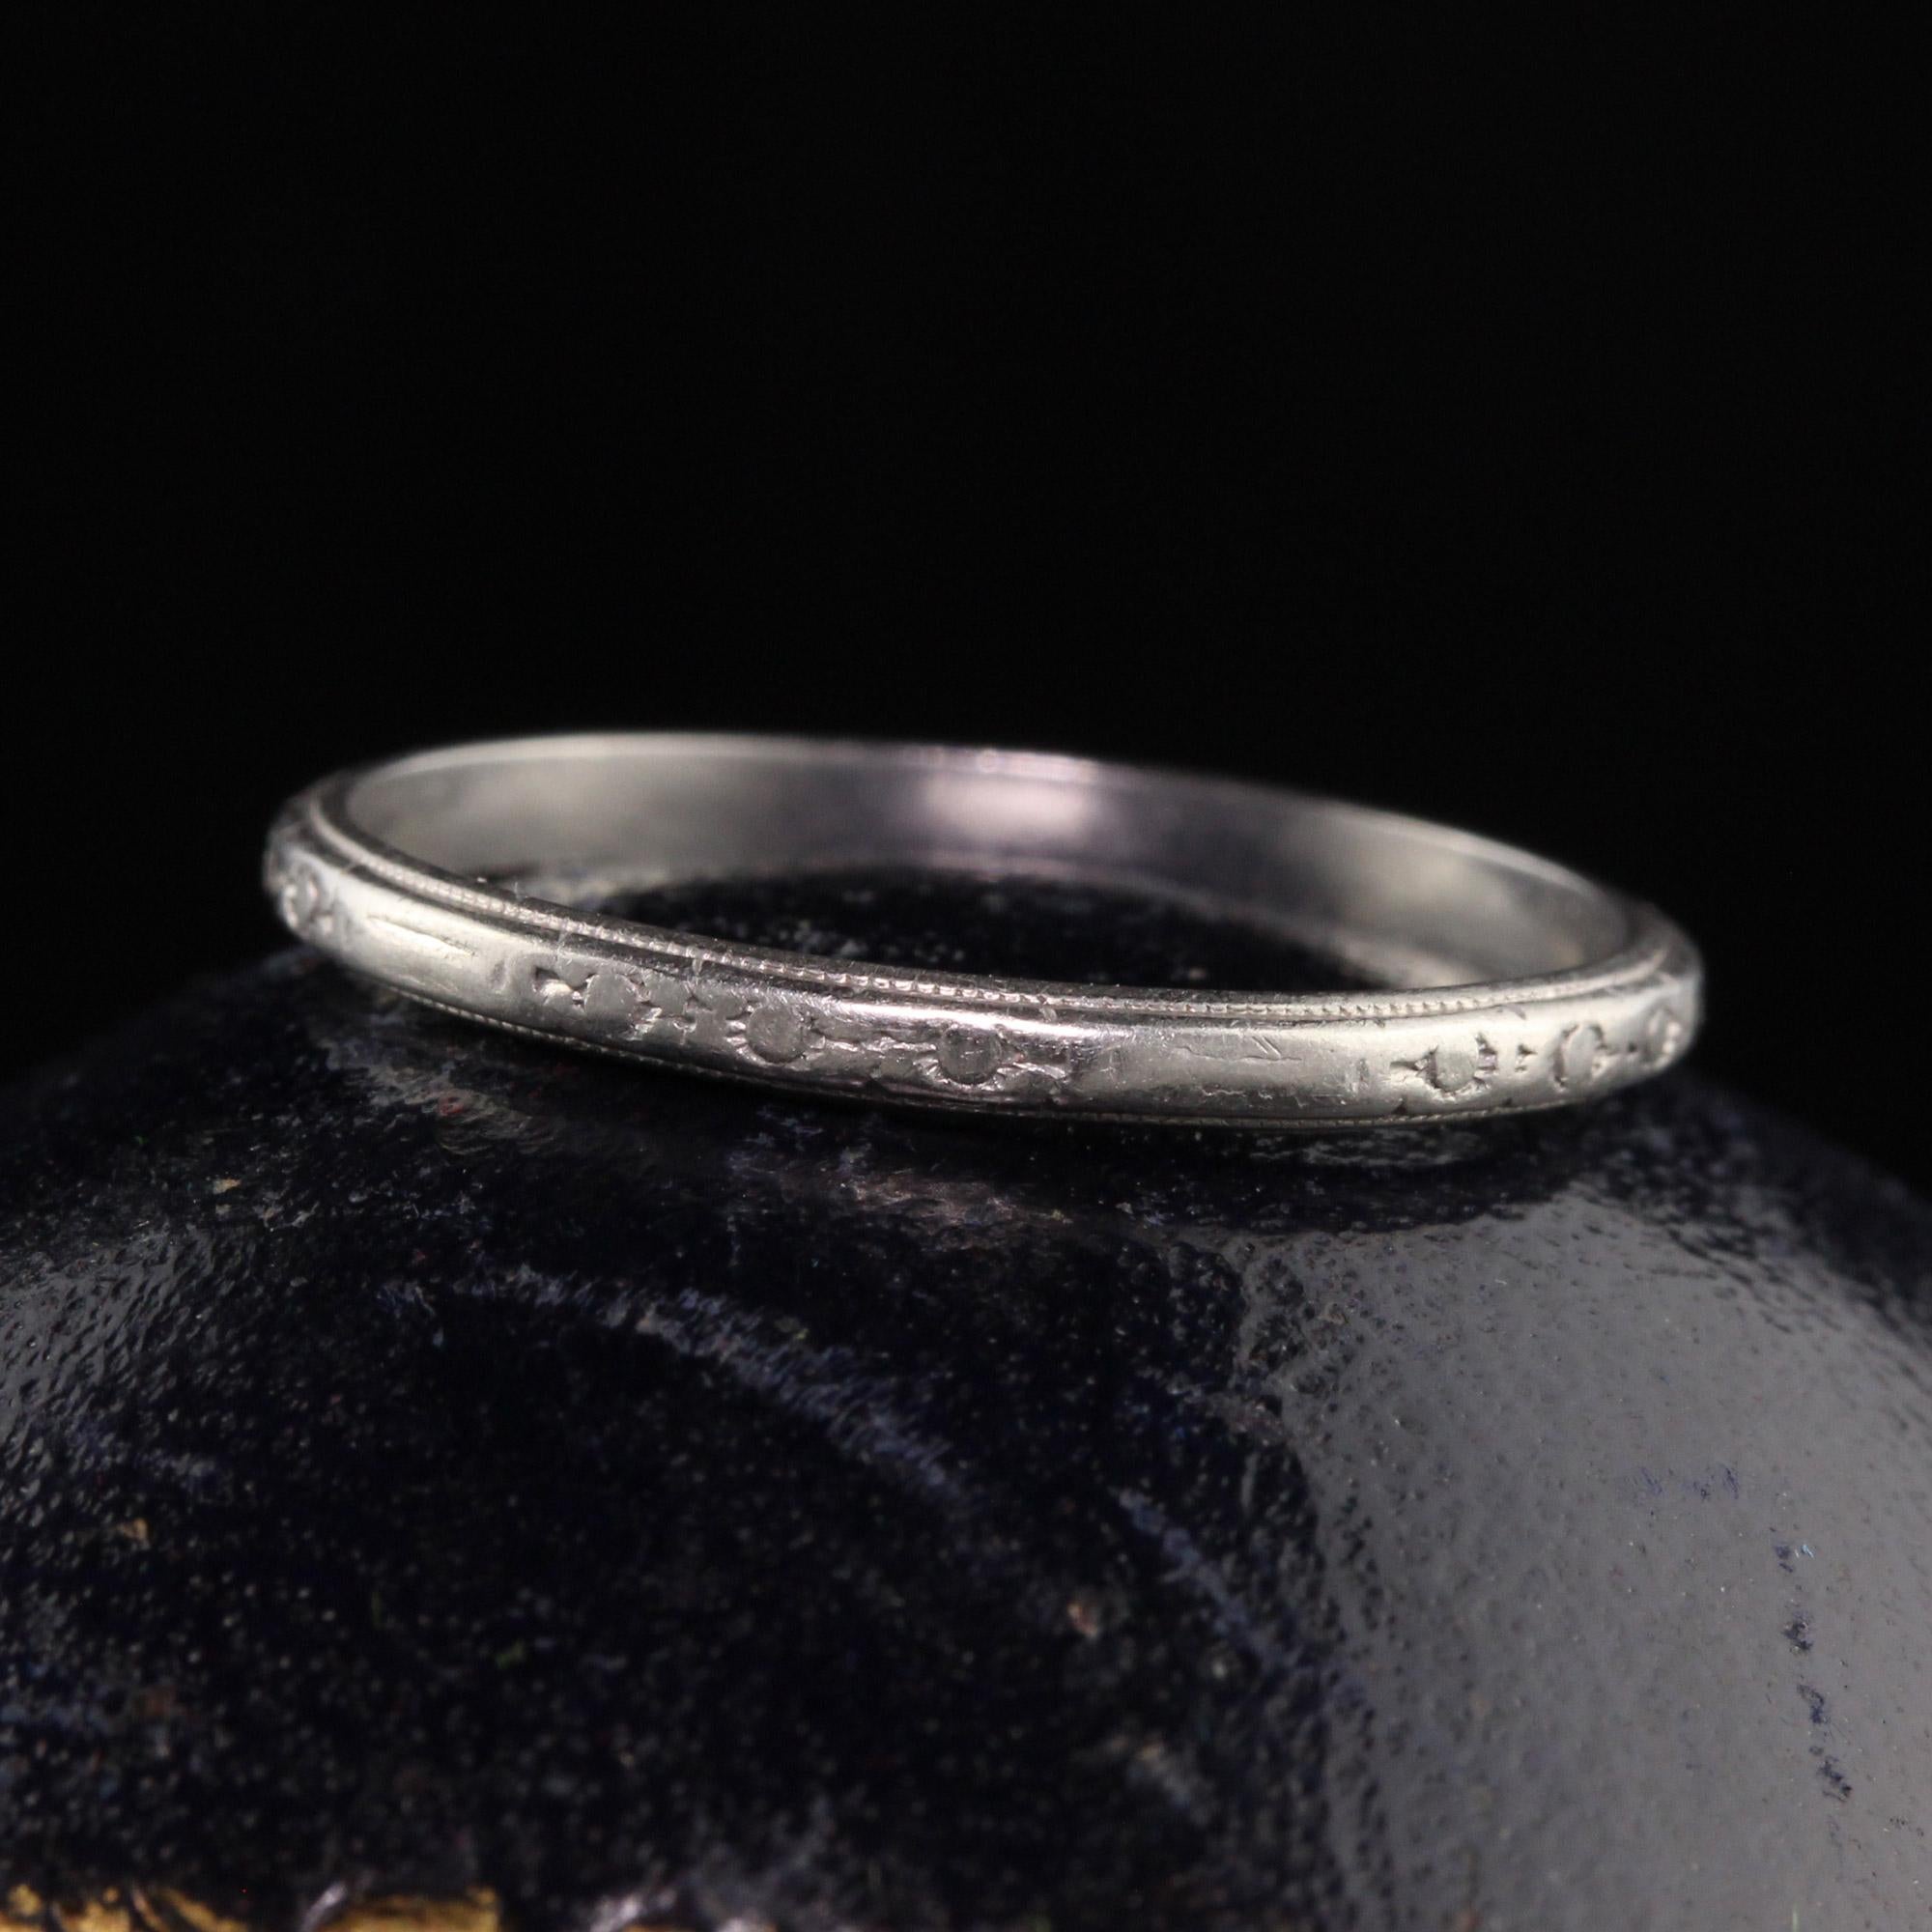 Beautiful Antique Art Deco Platinum Engraved Wedding Band - Size 7 1/2. This classic wedding band has nice engravings going around the entire ring. It is in great condition and can be stacked with other bands as well.

Item #R1024

Metal: